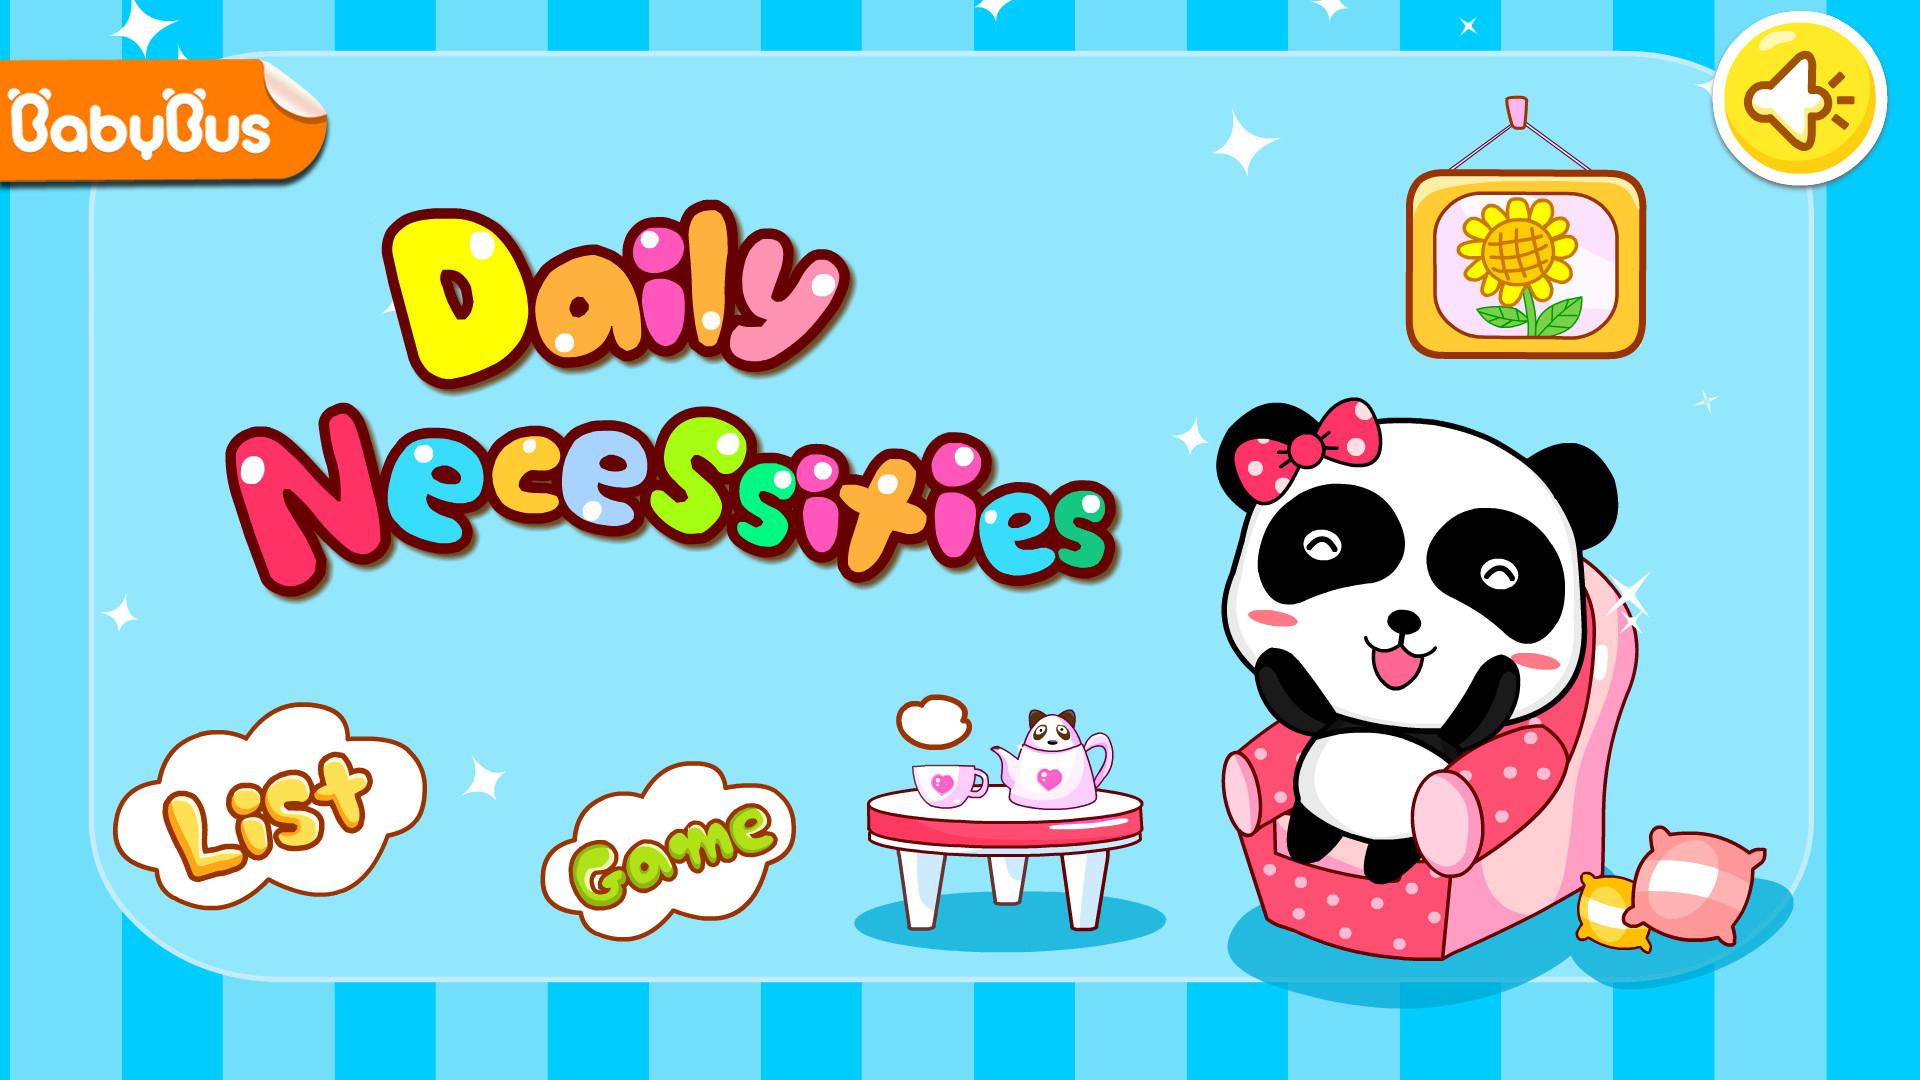 Android application Daily Necessities by BabyBus screenshort